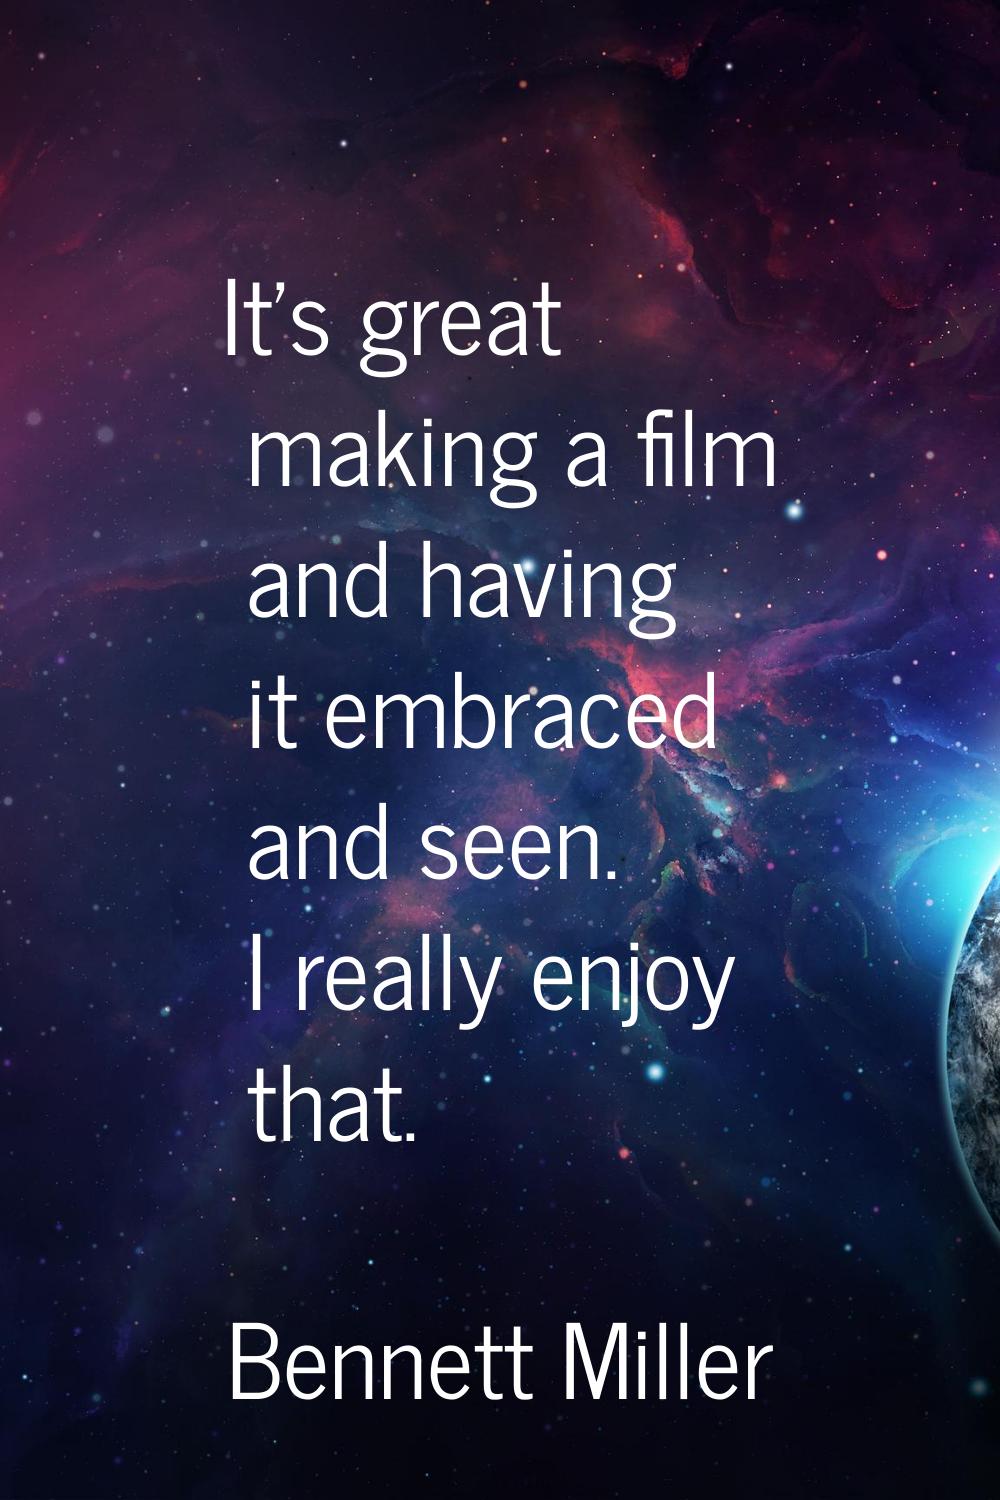 It's great making a film and having it embraced and seen. I really enjoy that.